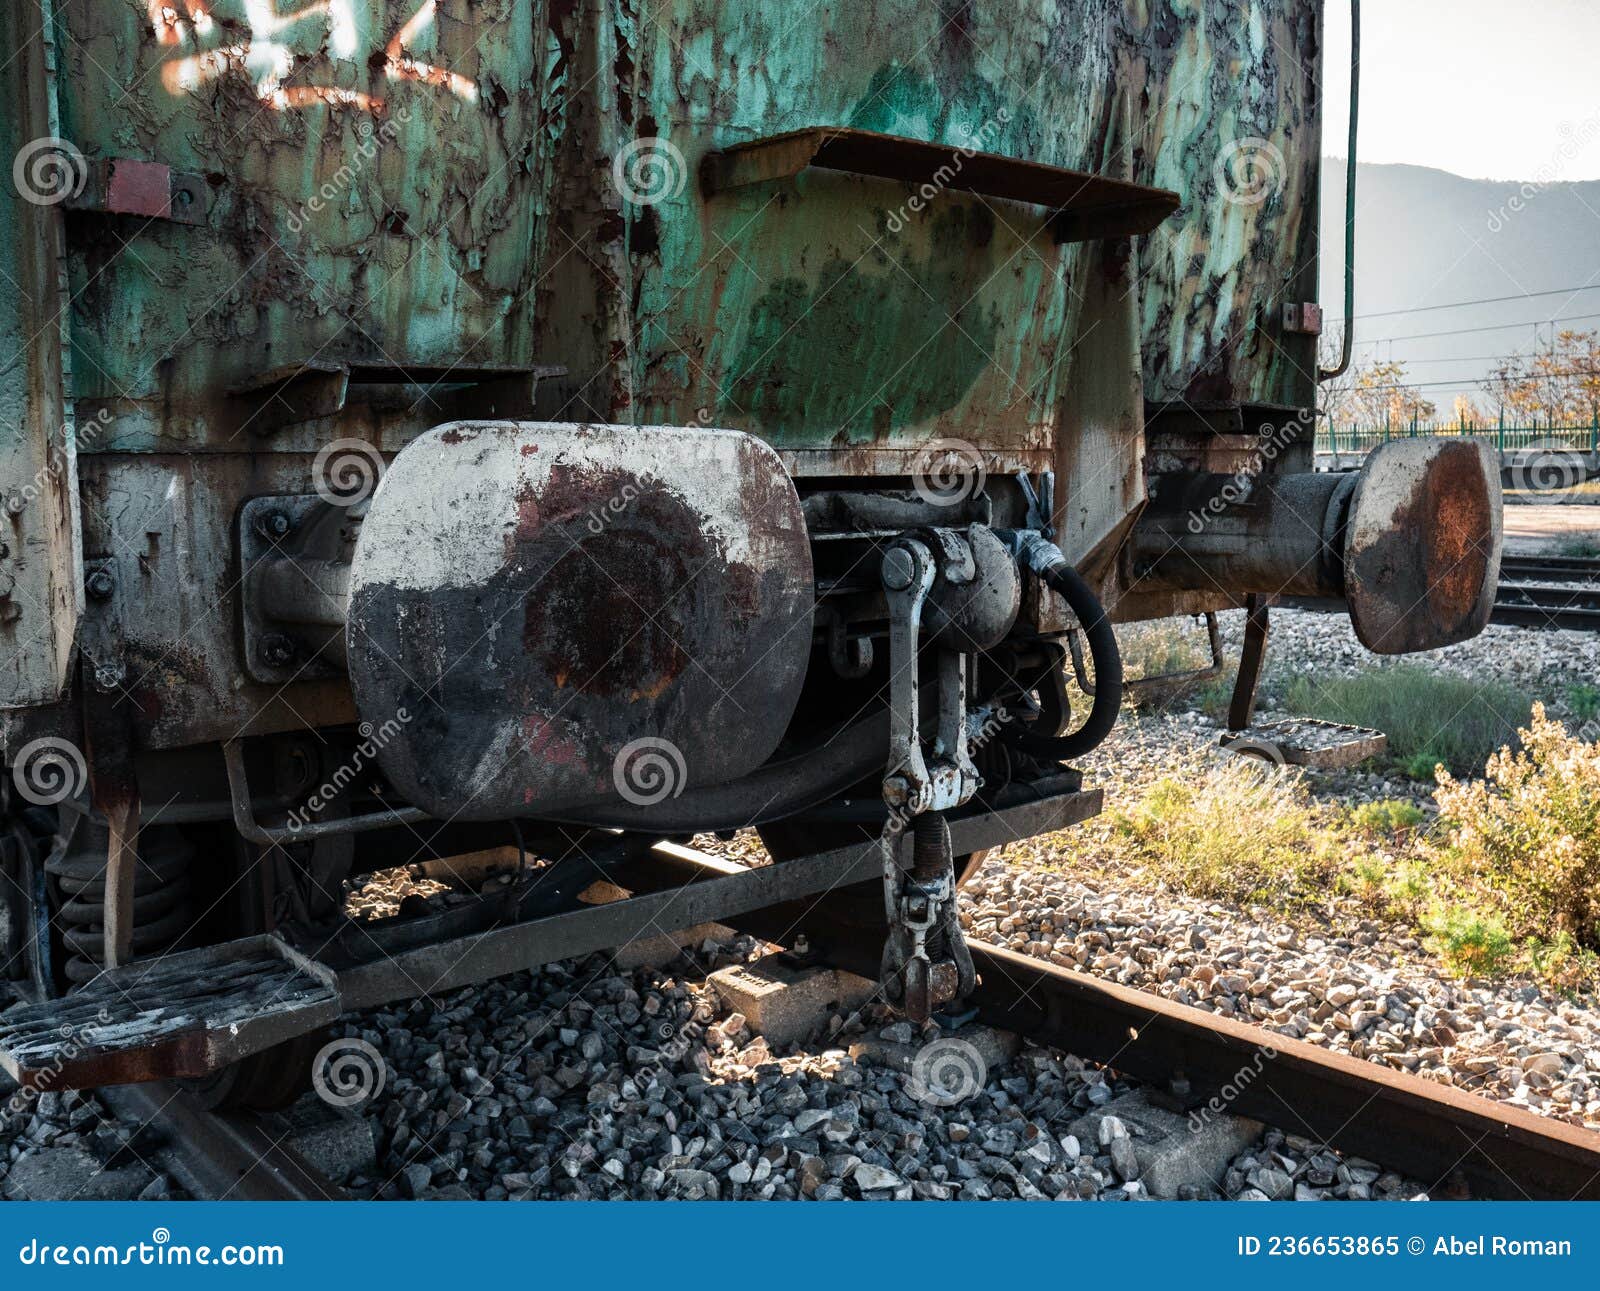 rear part of a freight wagon with its buffers and hooks waiting to be hooked up to the rest of the railway vehicles